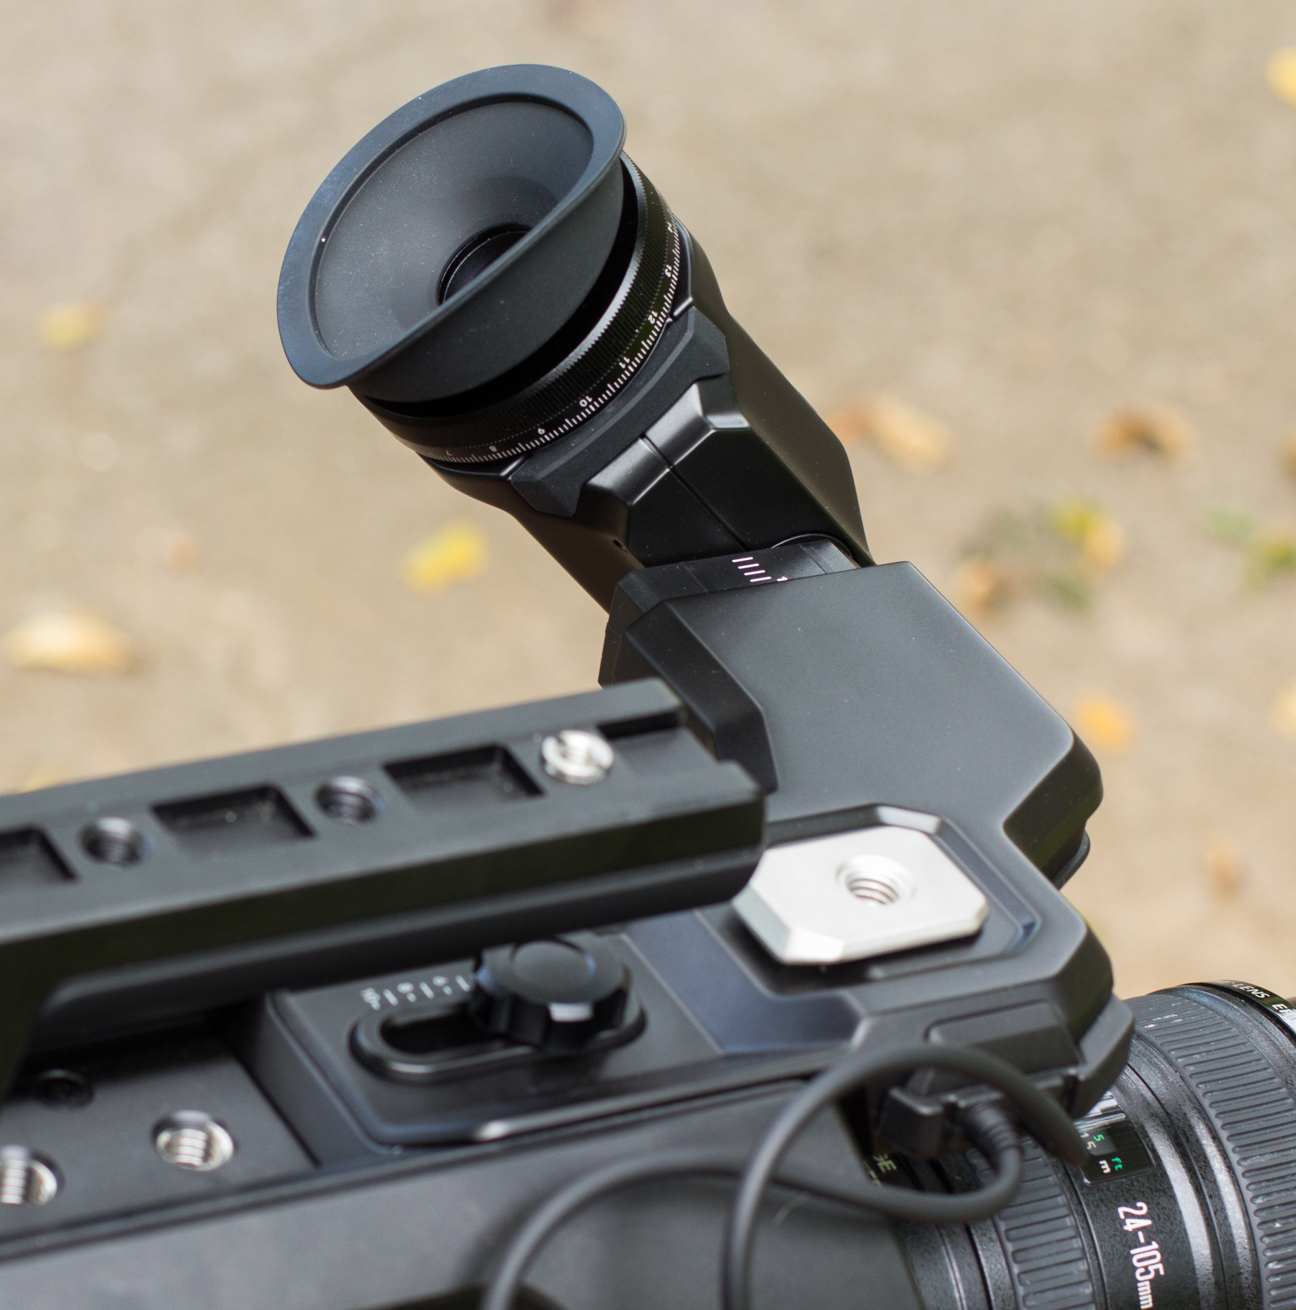 Blackmagic's URSA Viewfinder Review by Brian Hallett - ProVideo